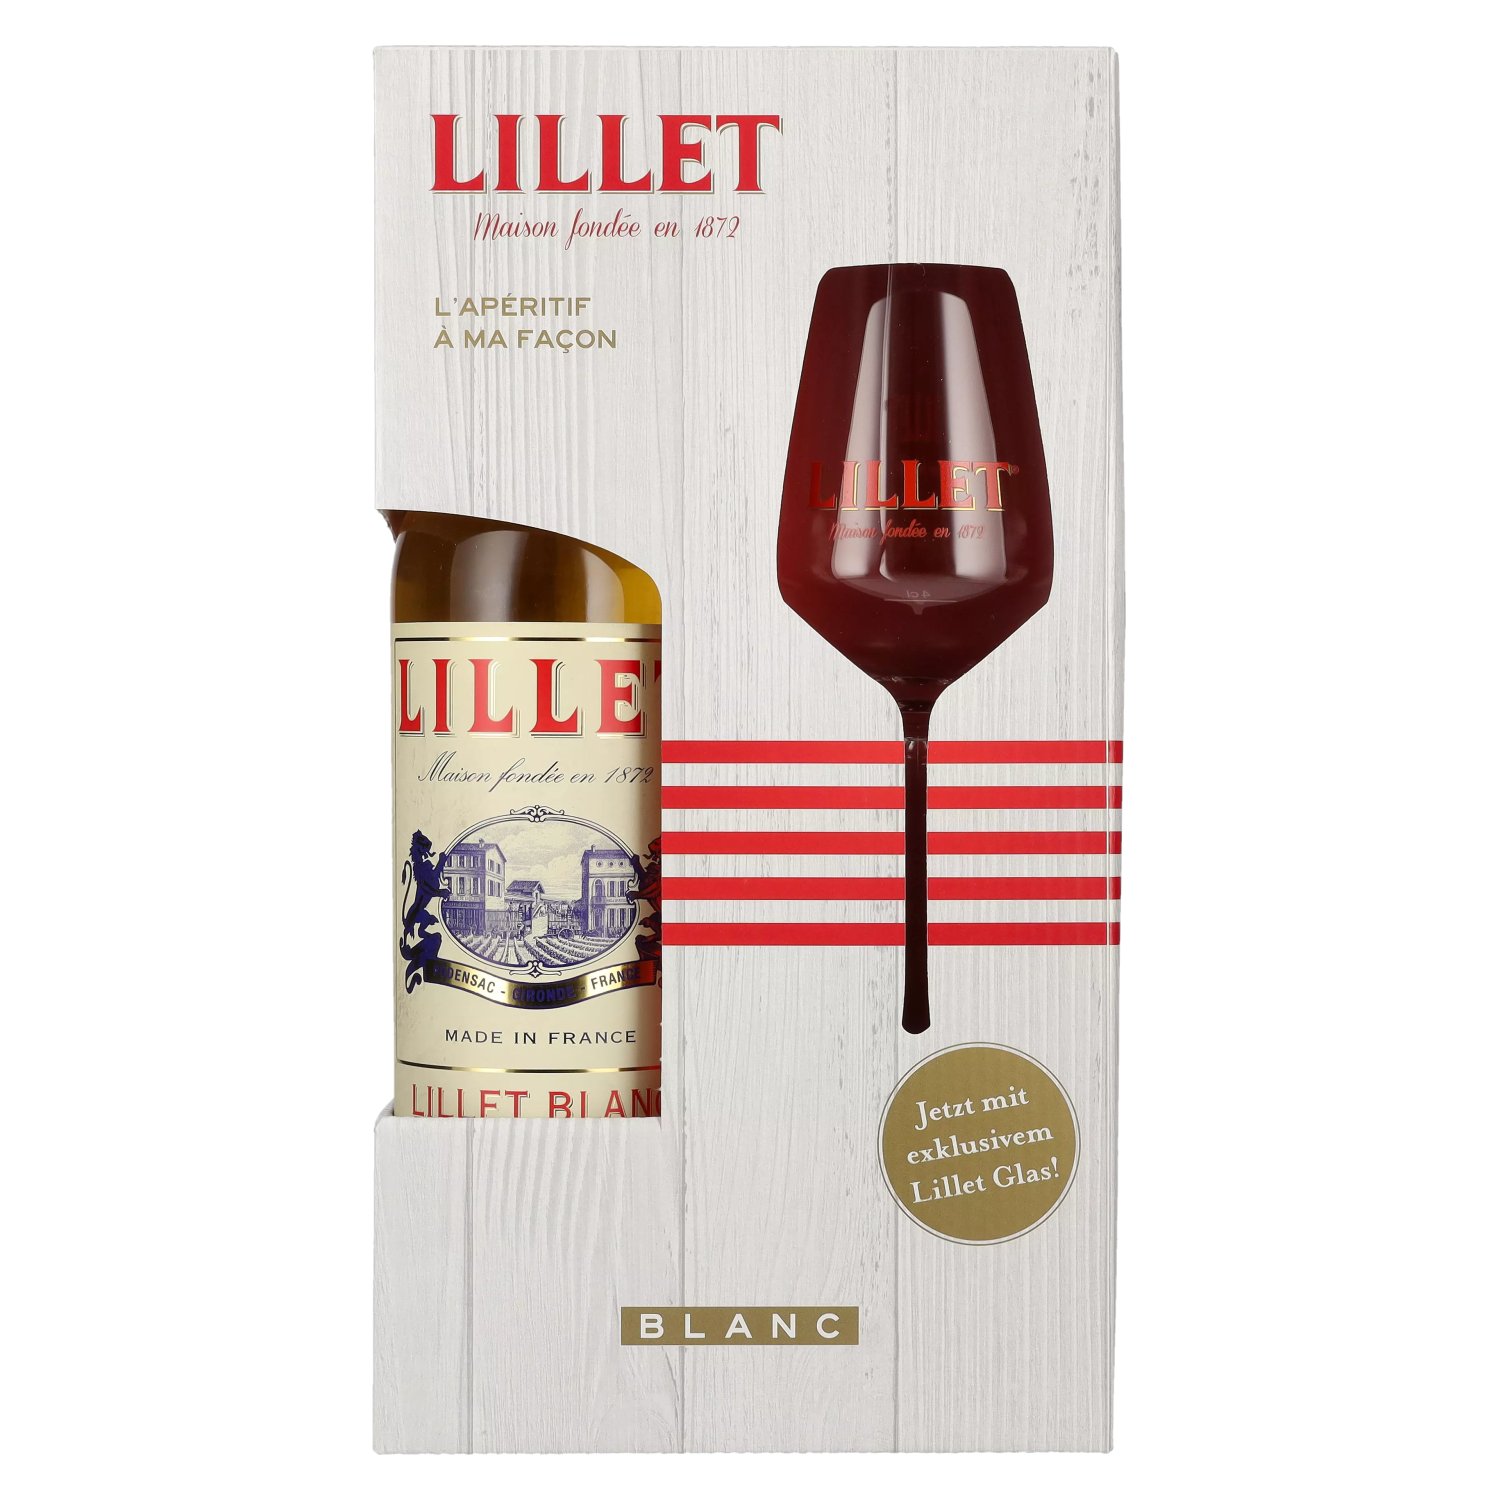 Lillet Blanc 17% glass 0,75l in Giftbox Vol. with